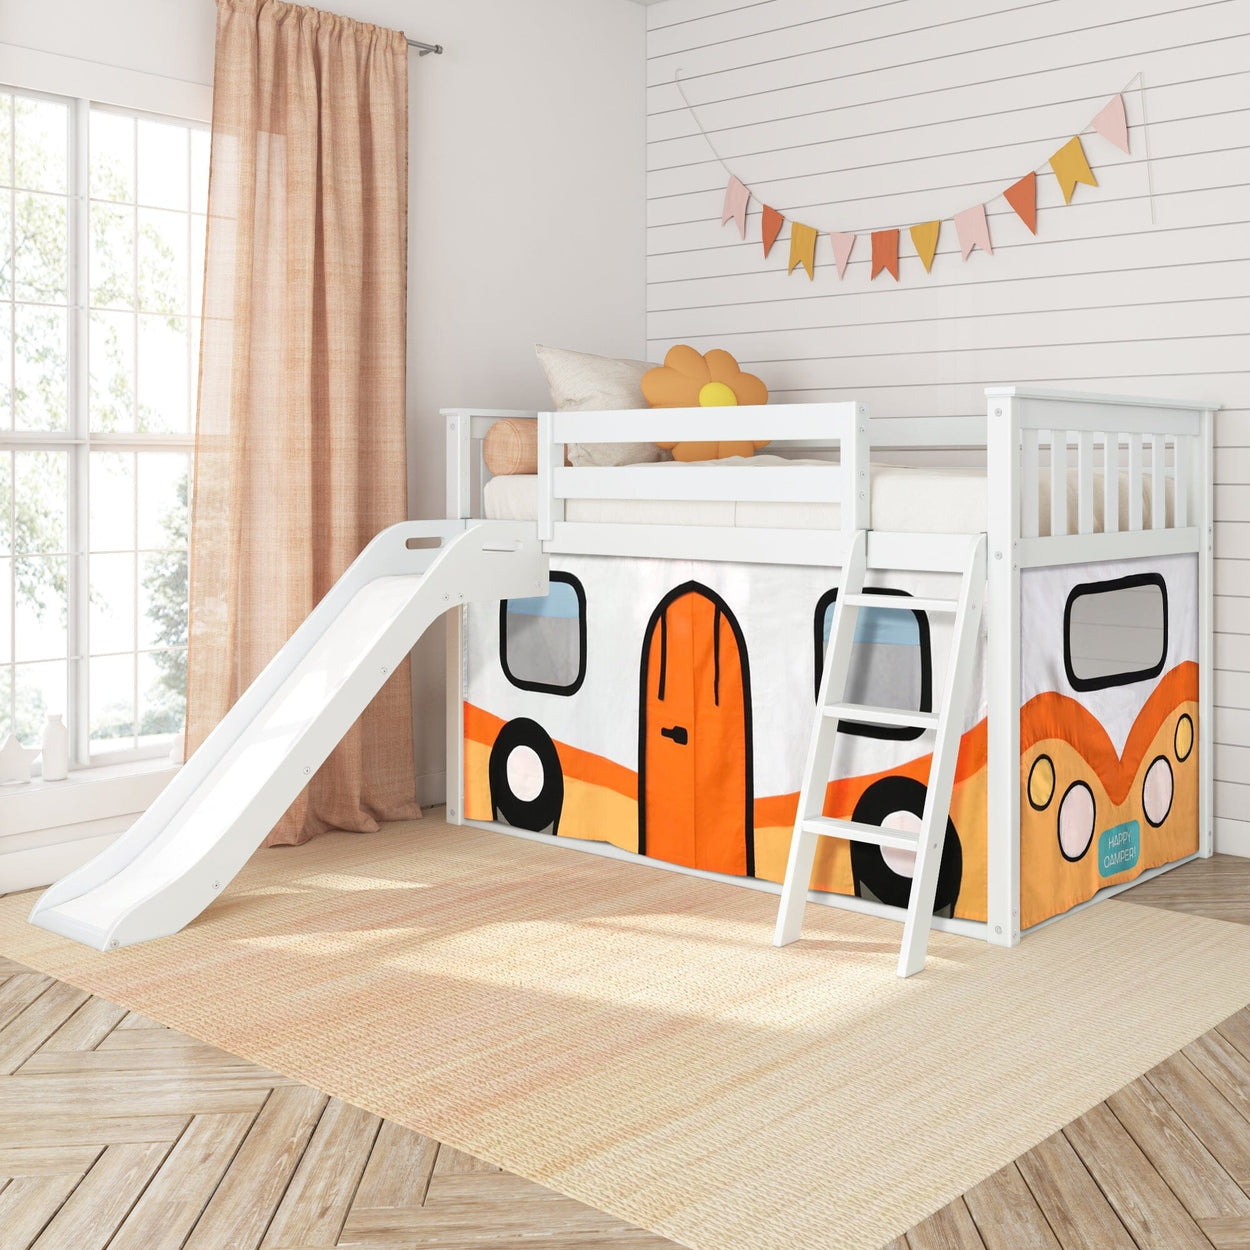 180417002067 : Bunk Beds Low Bunk with Easy Slide and Orange Camper Van Curtain, White